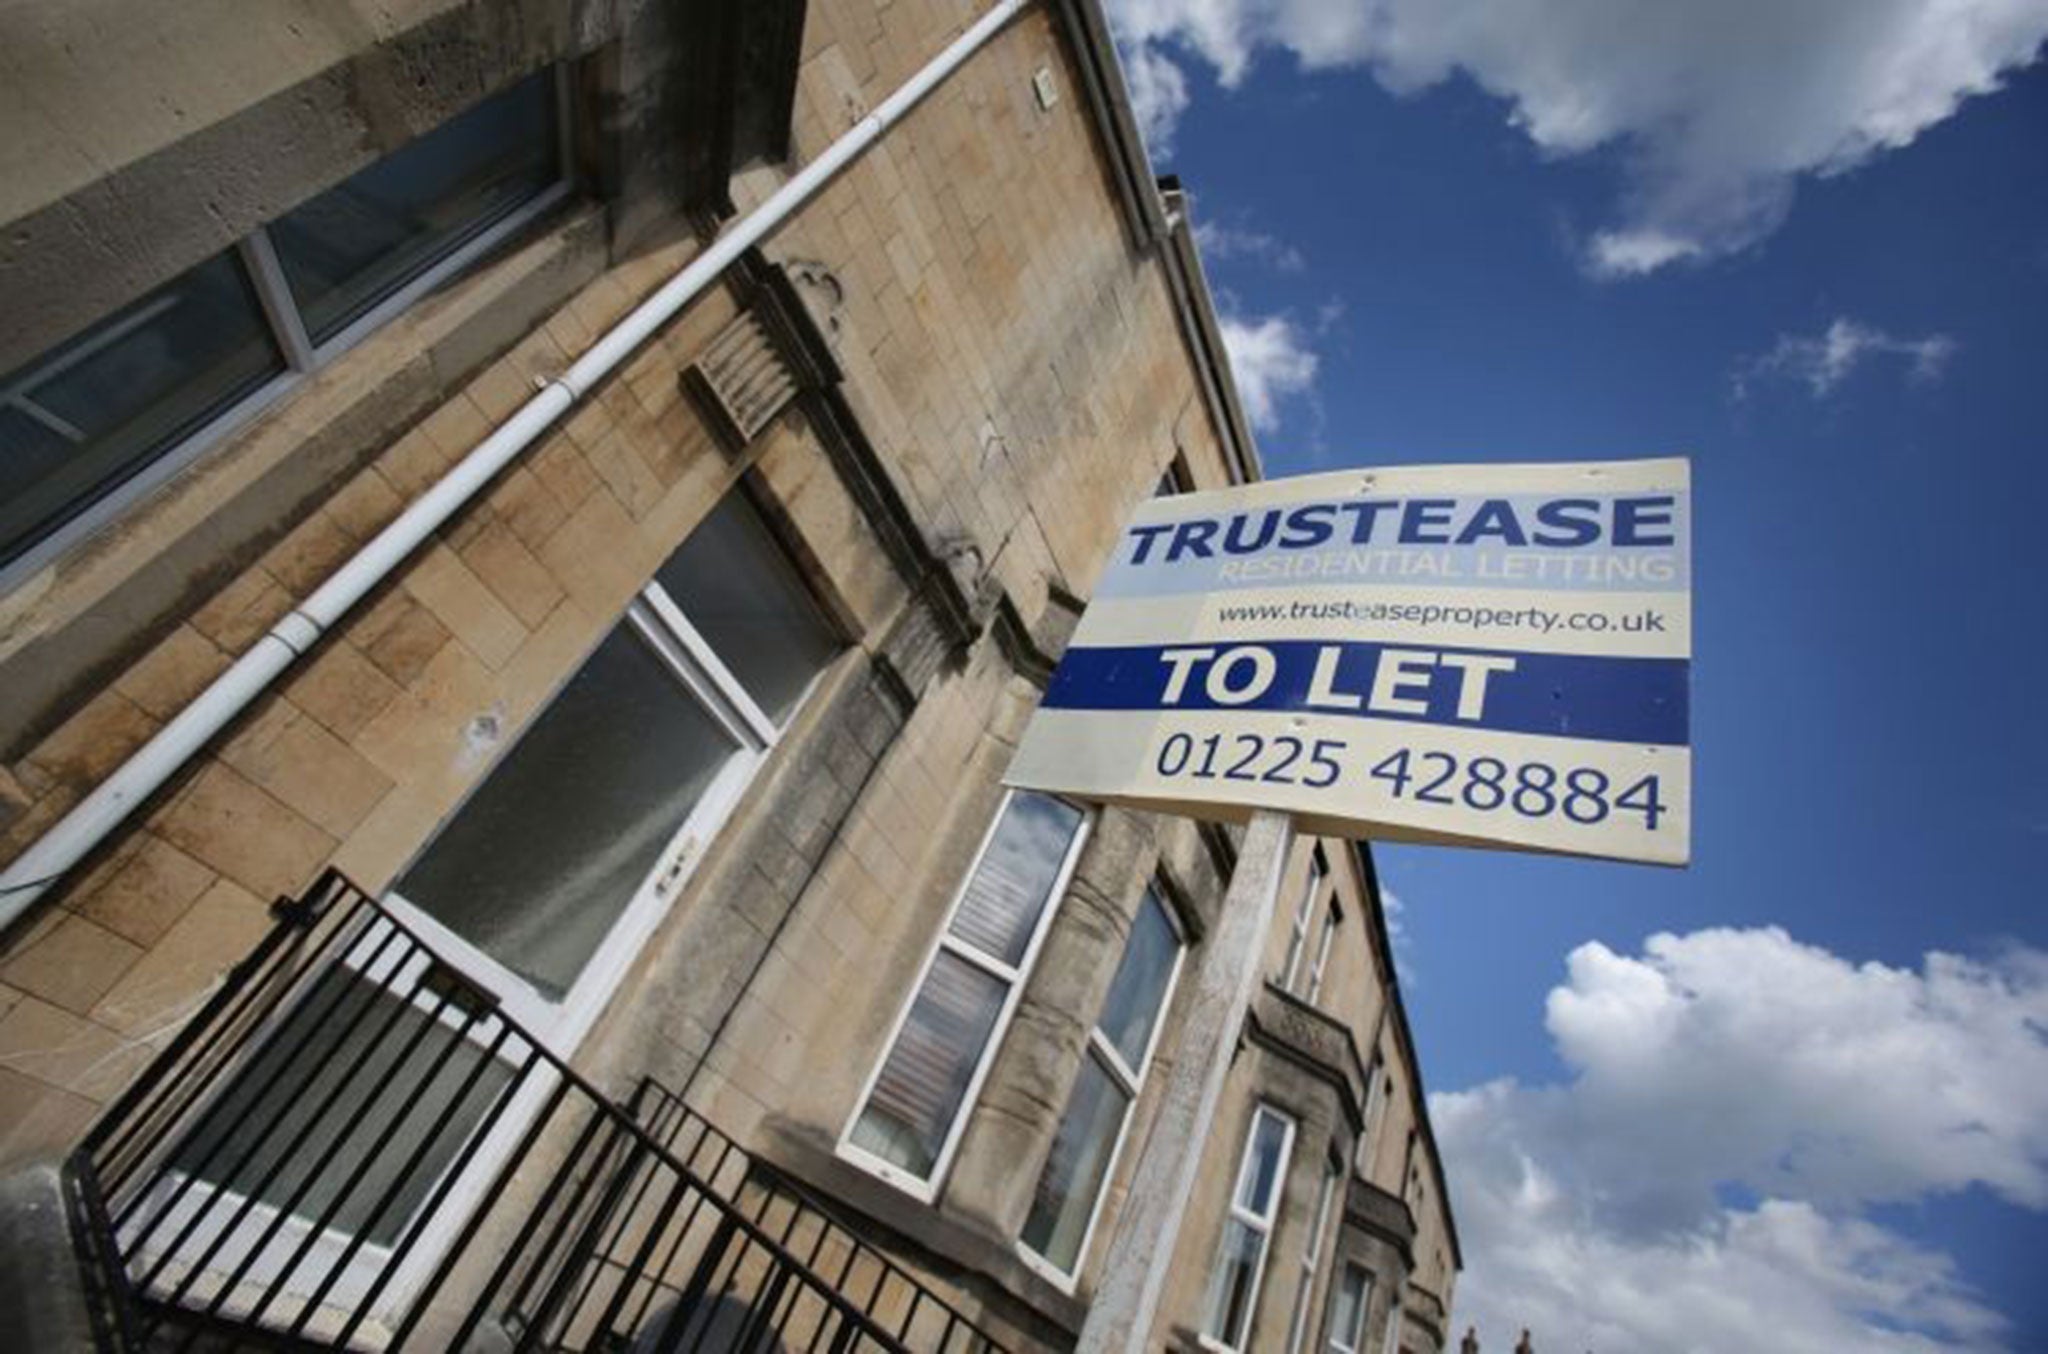 All the signs have been pointing up for buy-to-let, but there are clouds on the horizon